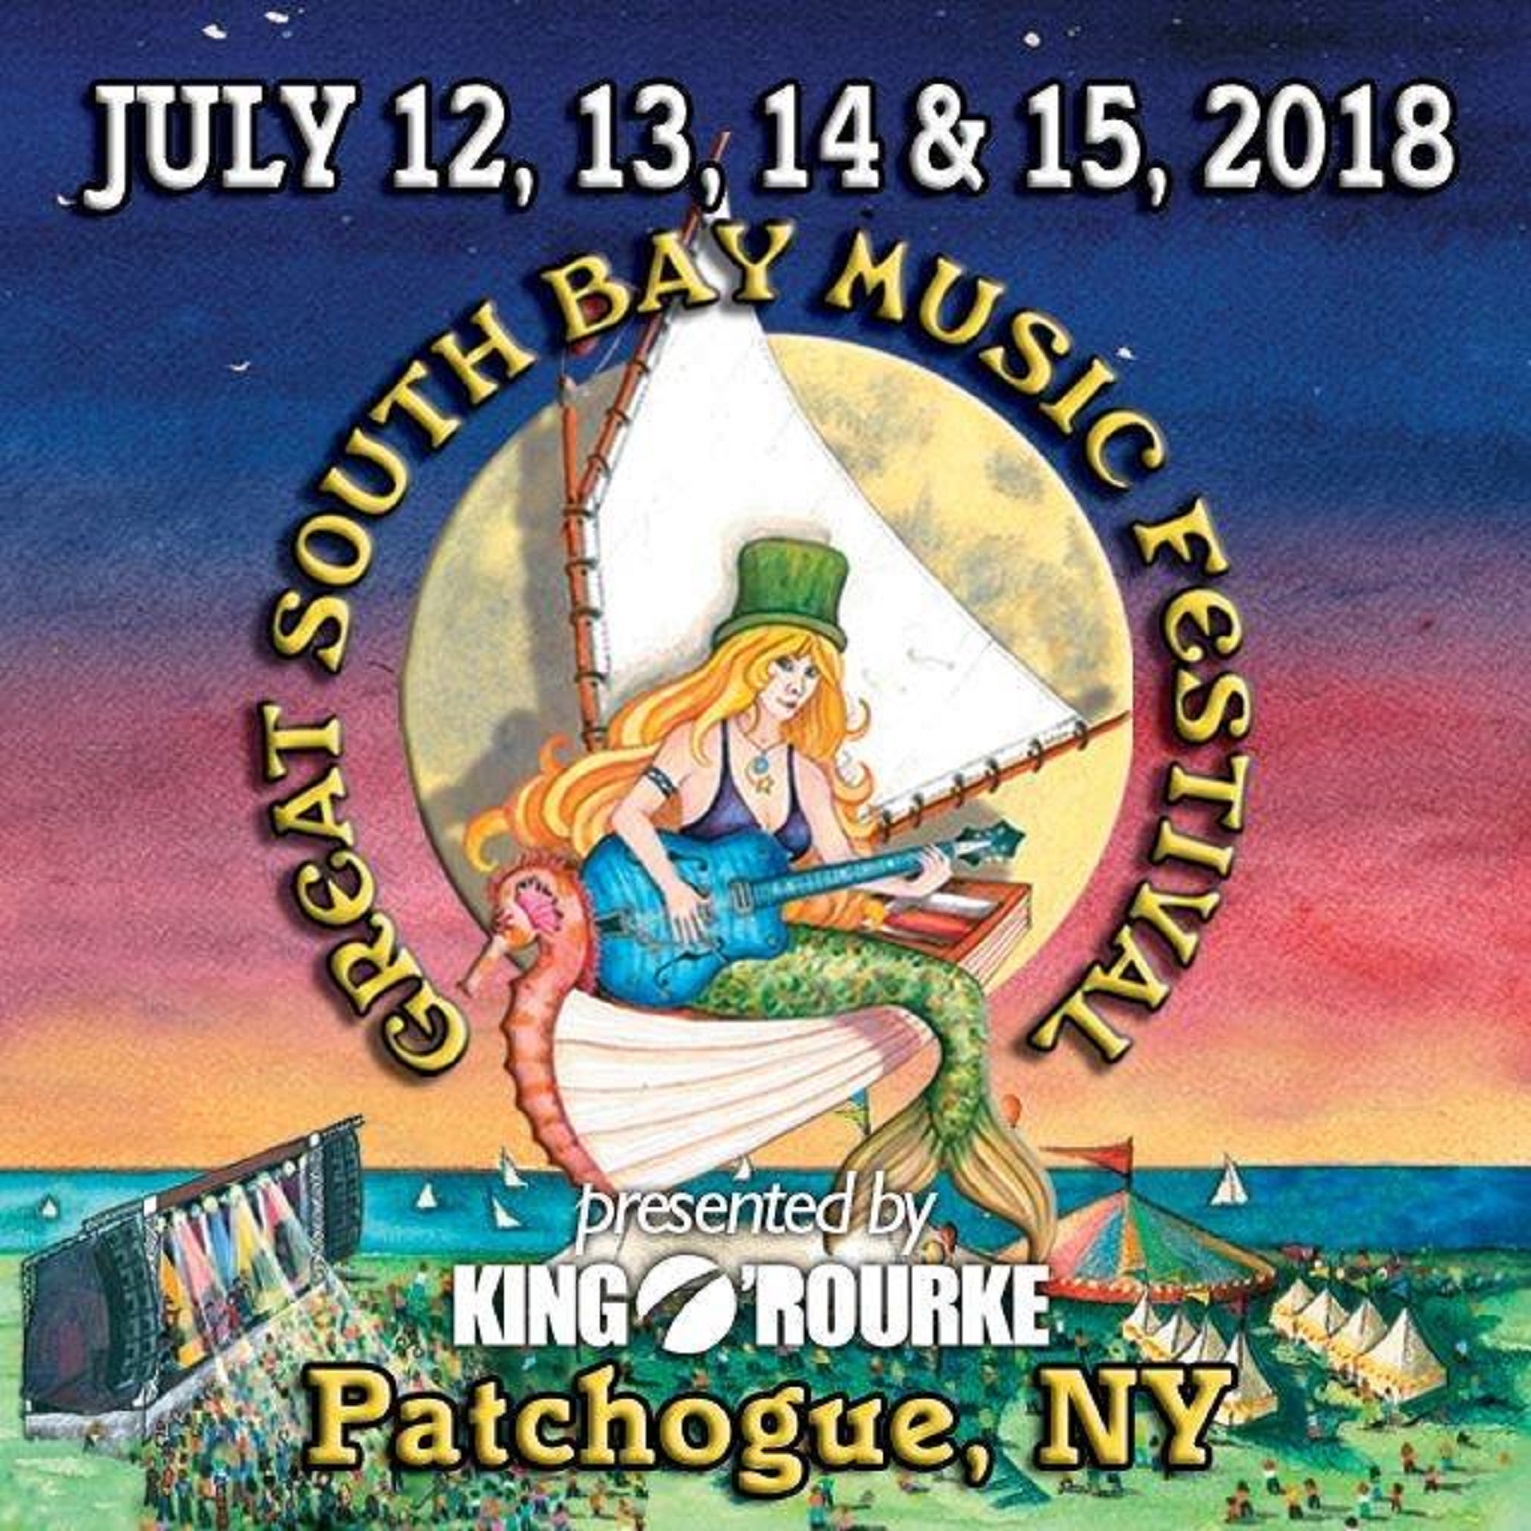 Great South Bay Music Festival Celebrating It's 12th Anniversary 